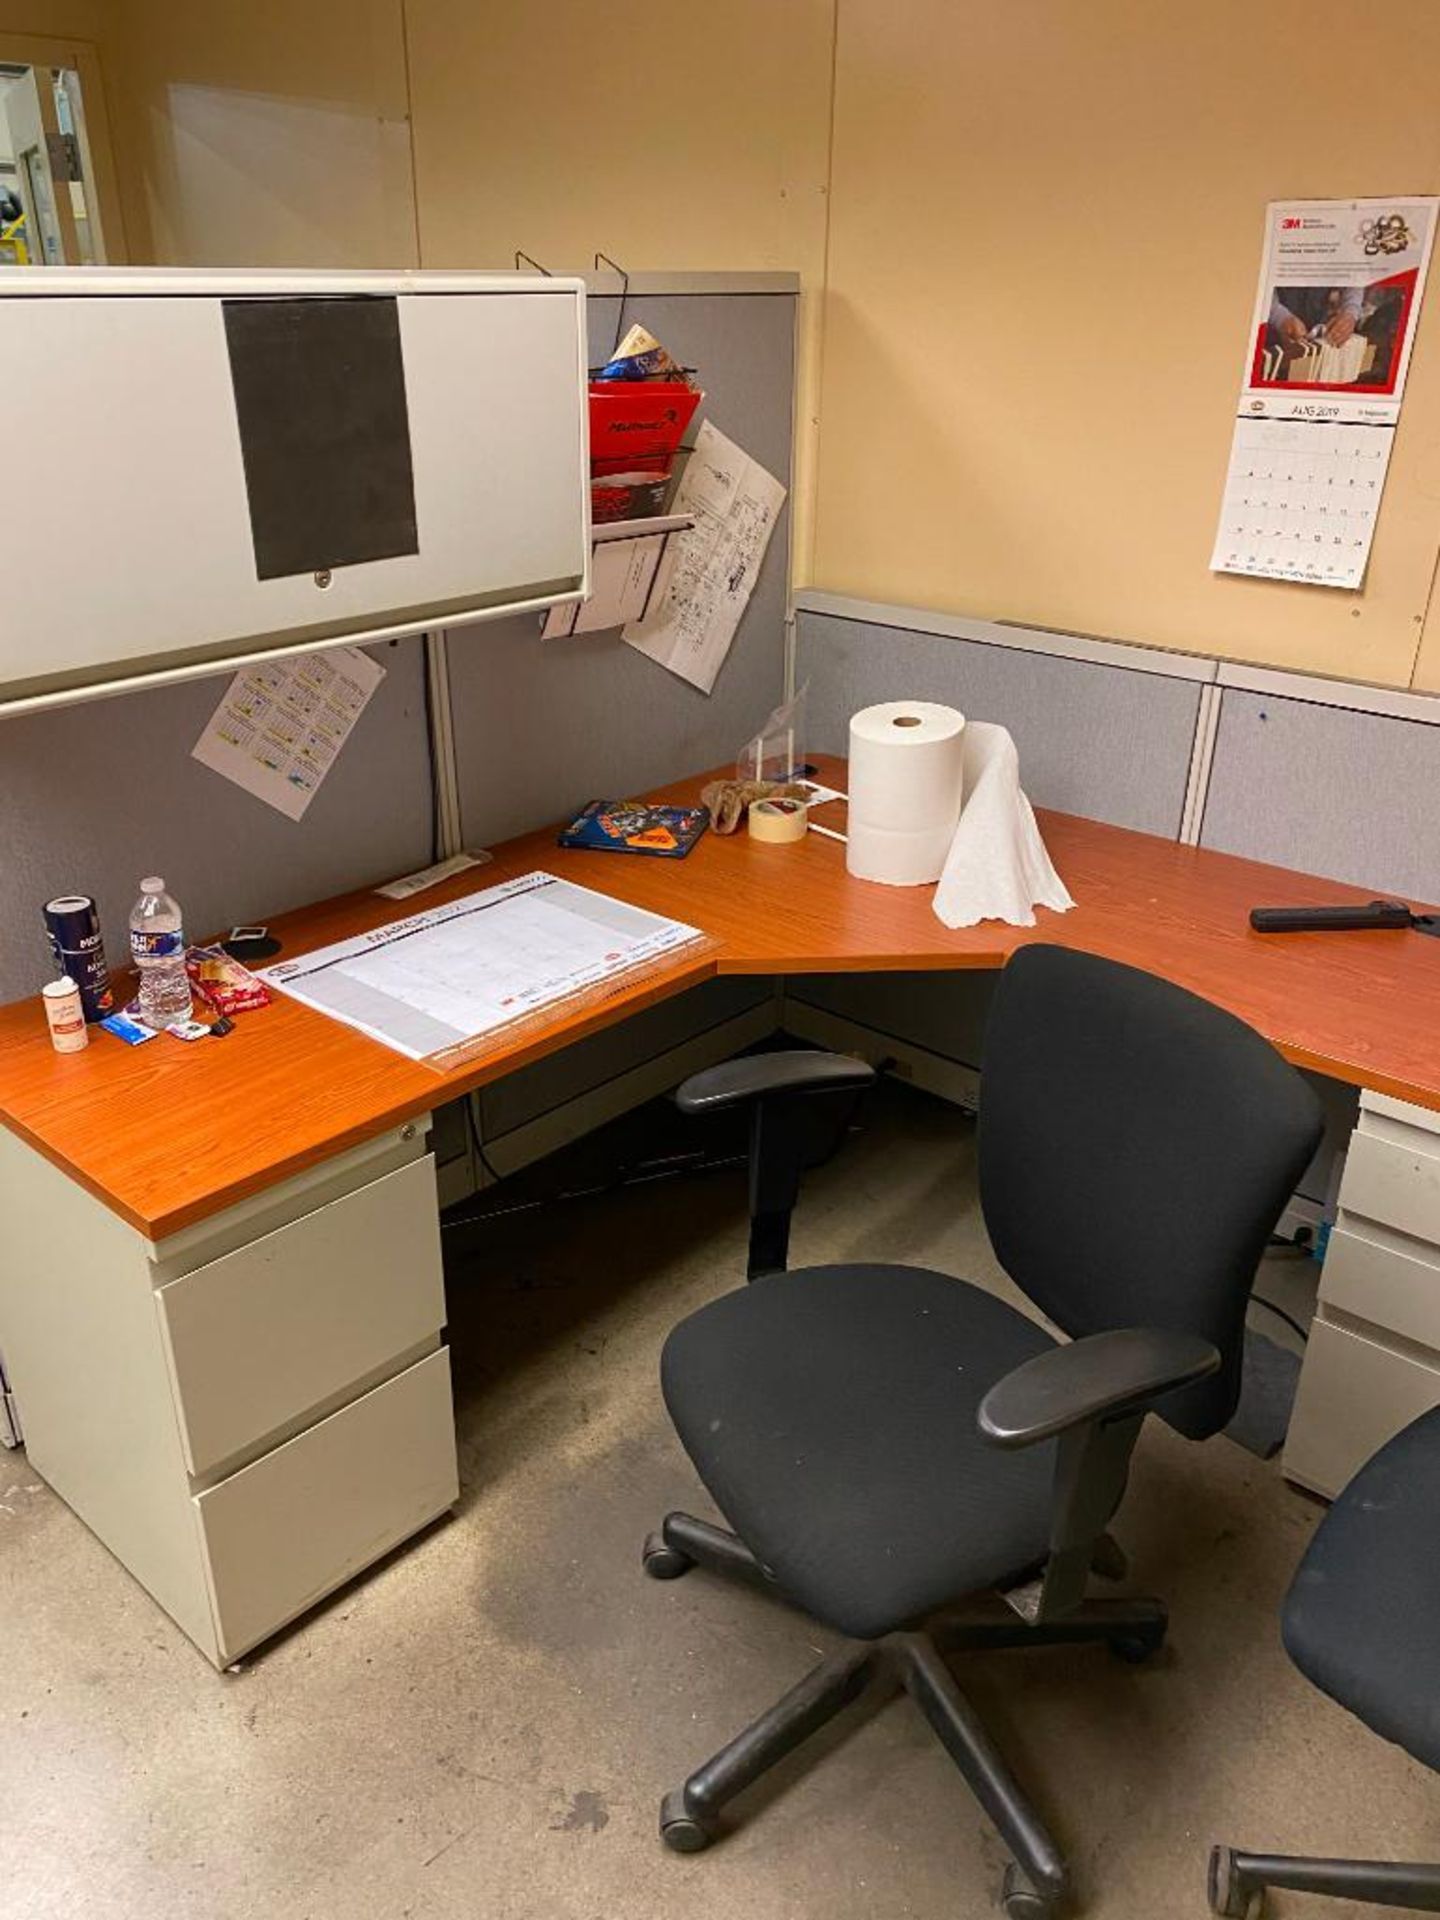 OFFICE BUILDING AND CONTENTS OF OFFICE FURNITURE AND CUBICLES - Image 4 of 5